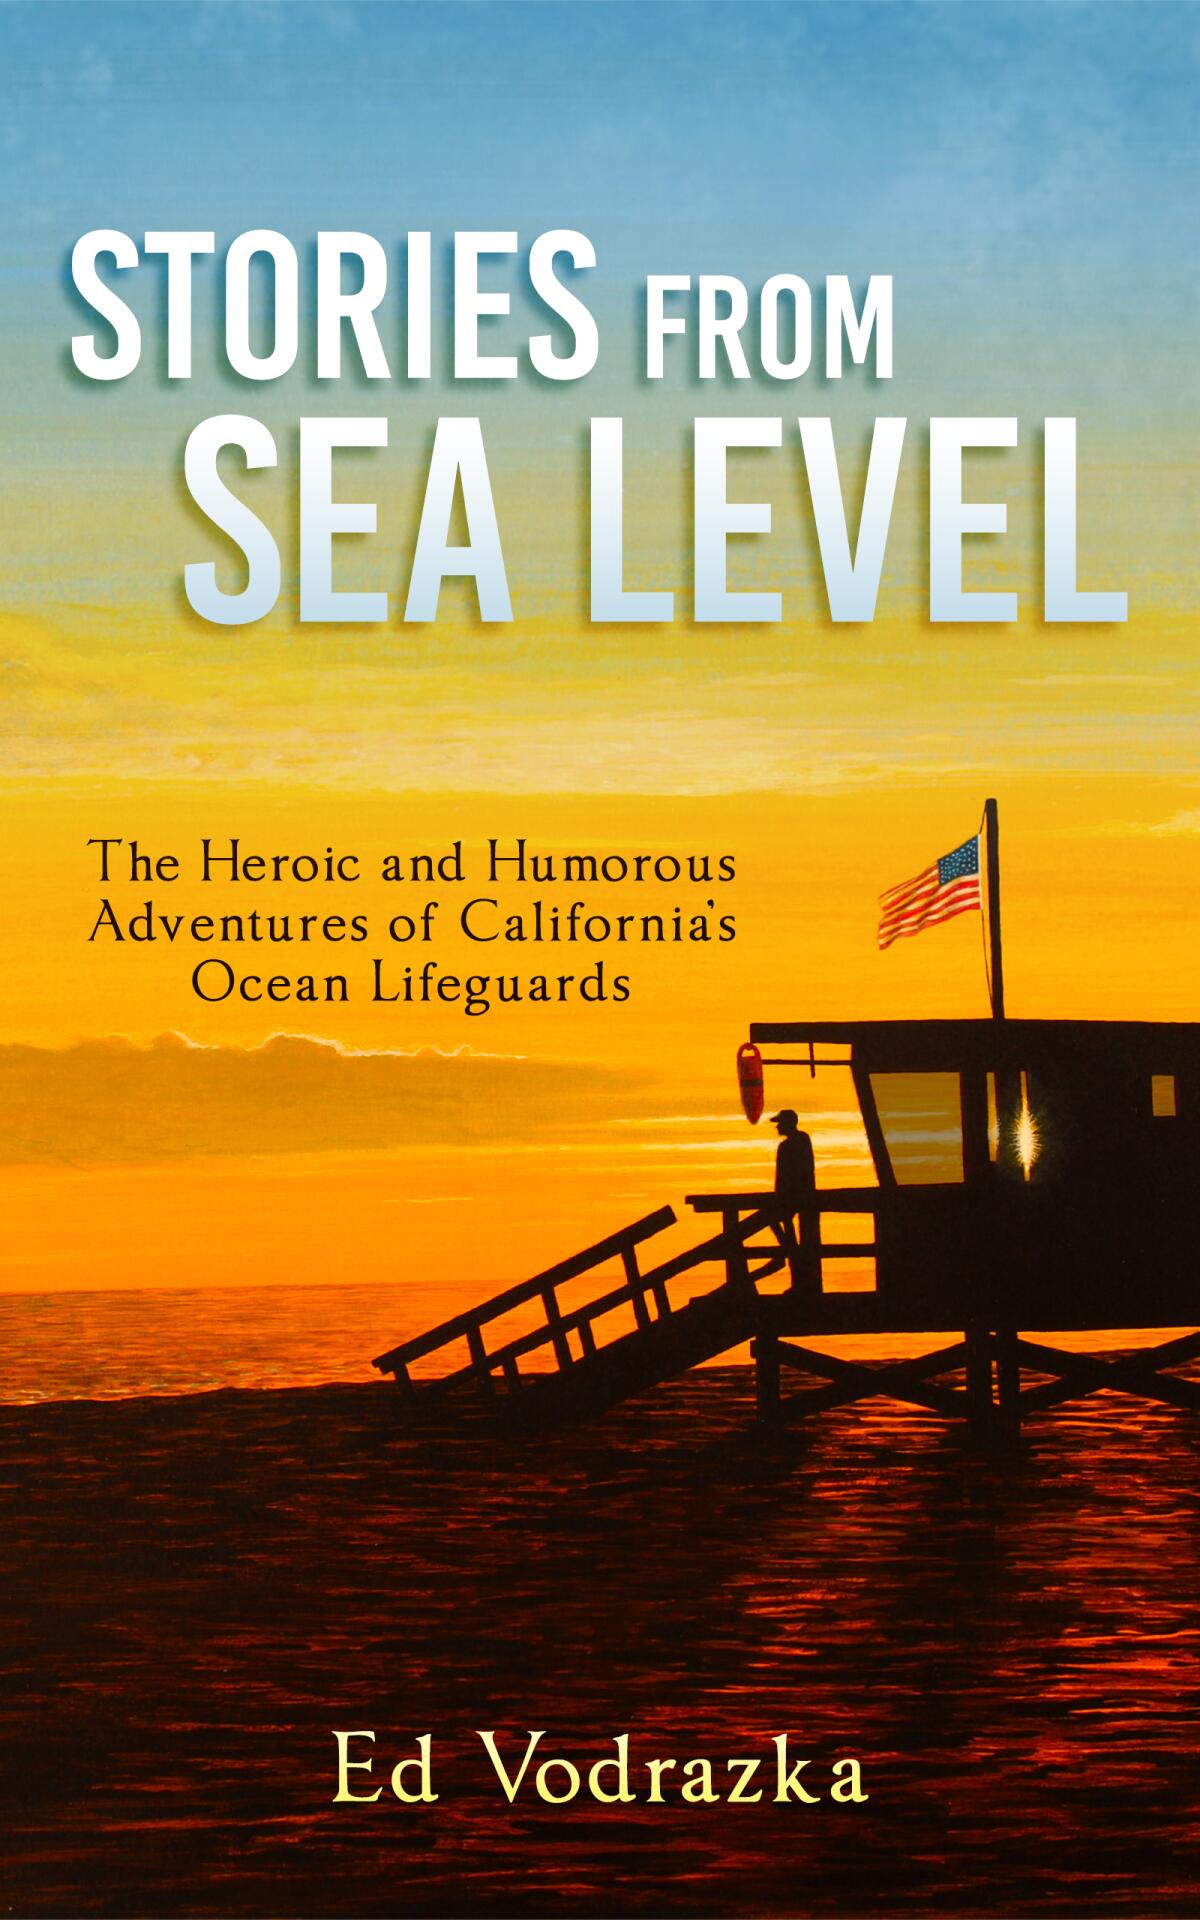 The cover of “Stories from Sea Level”